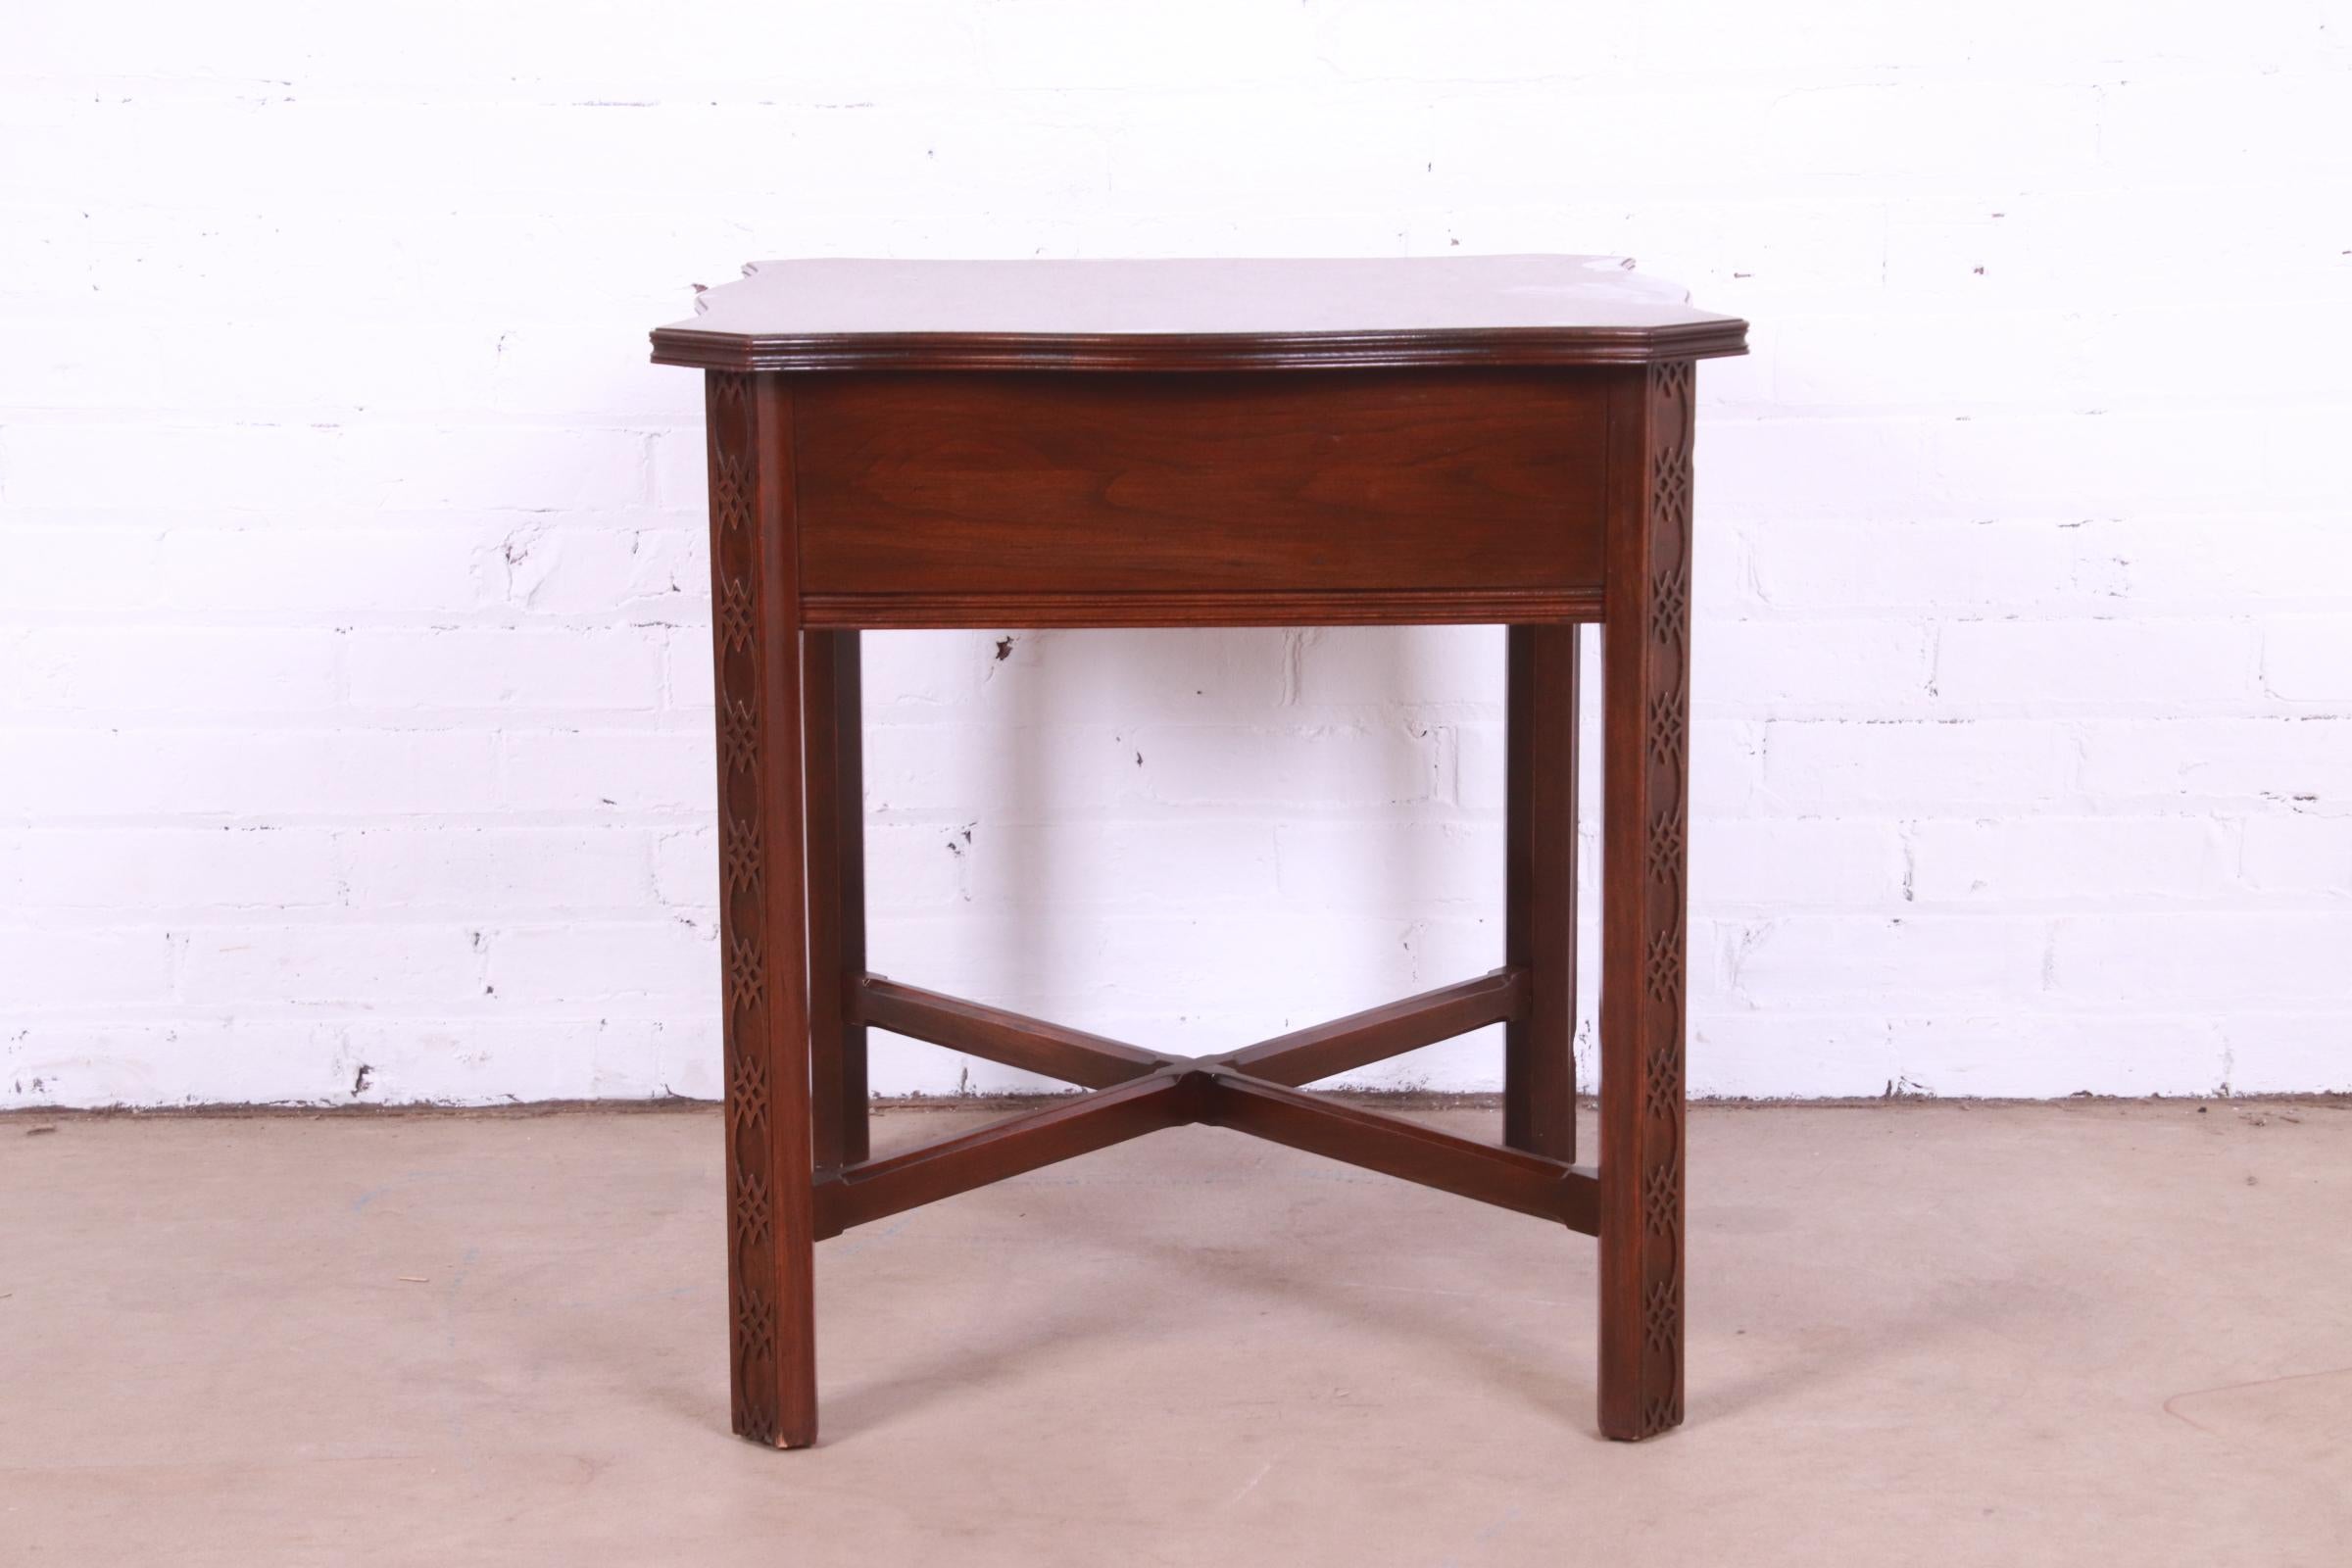 Ethan Allen Georgian Carved Cherry Wood Tea Table or Occasional Side Table 10